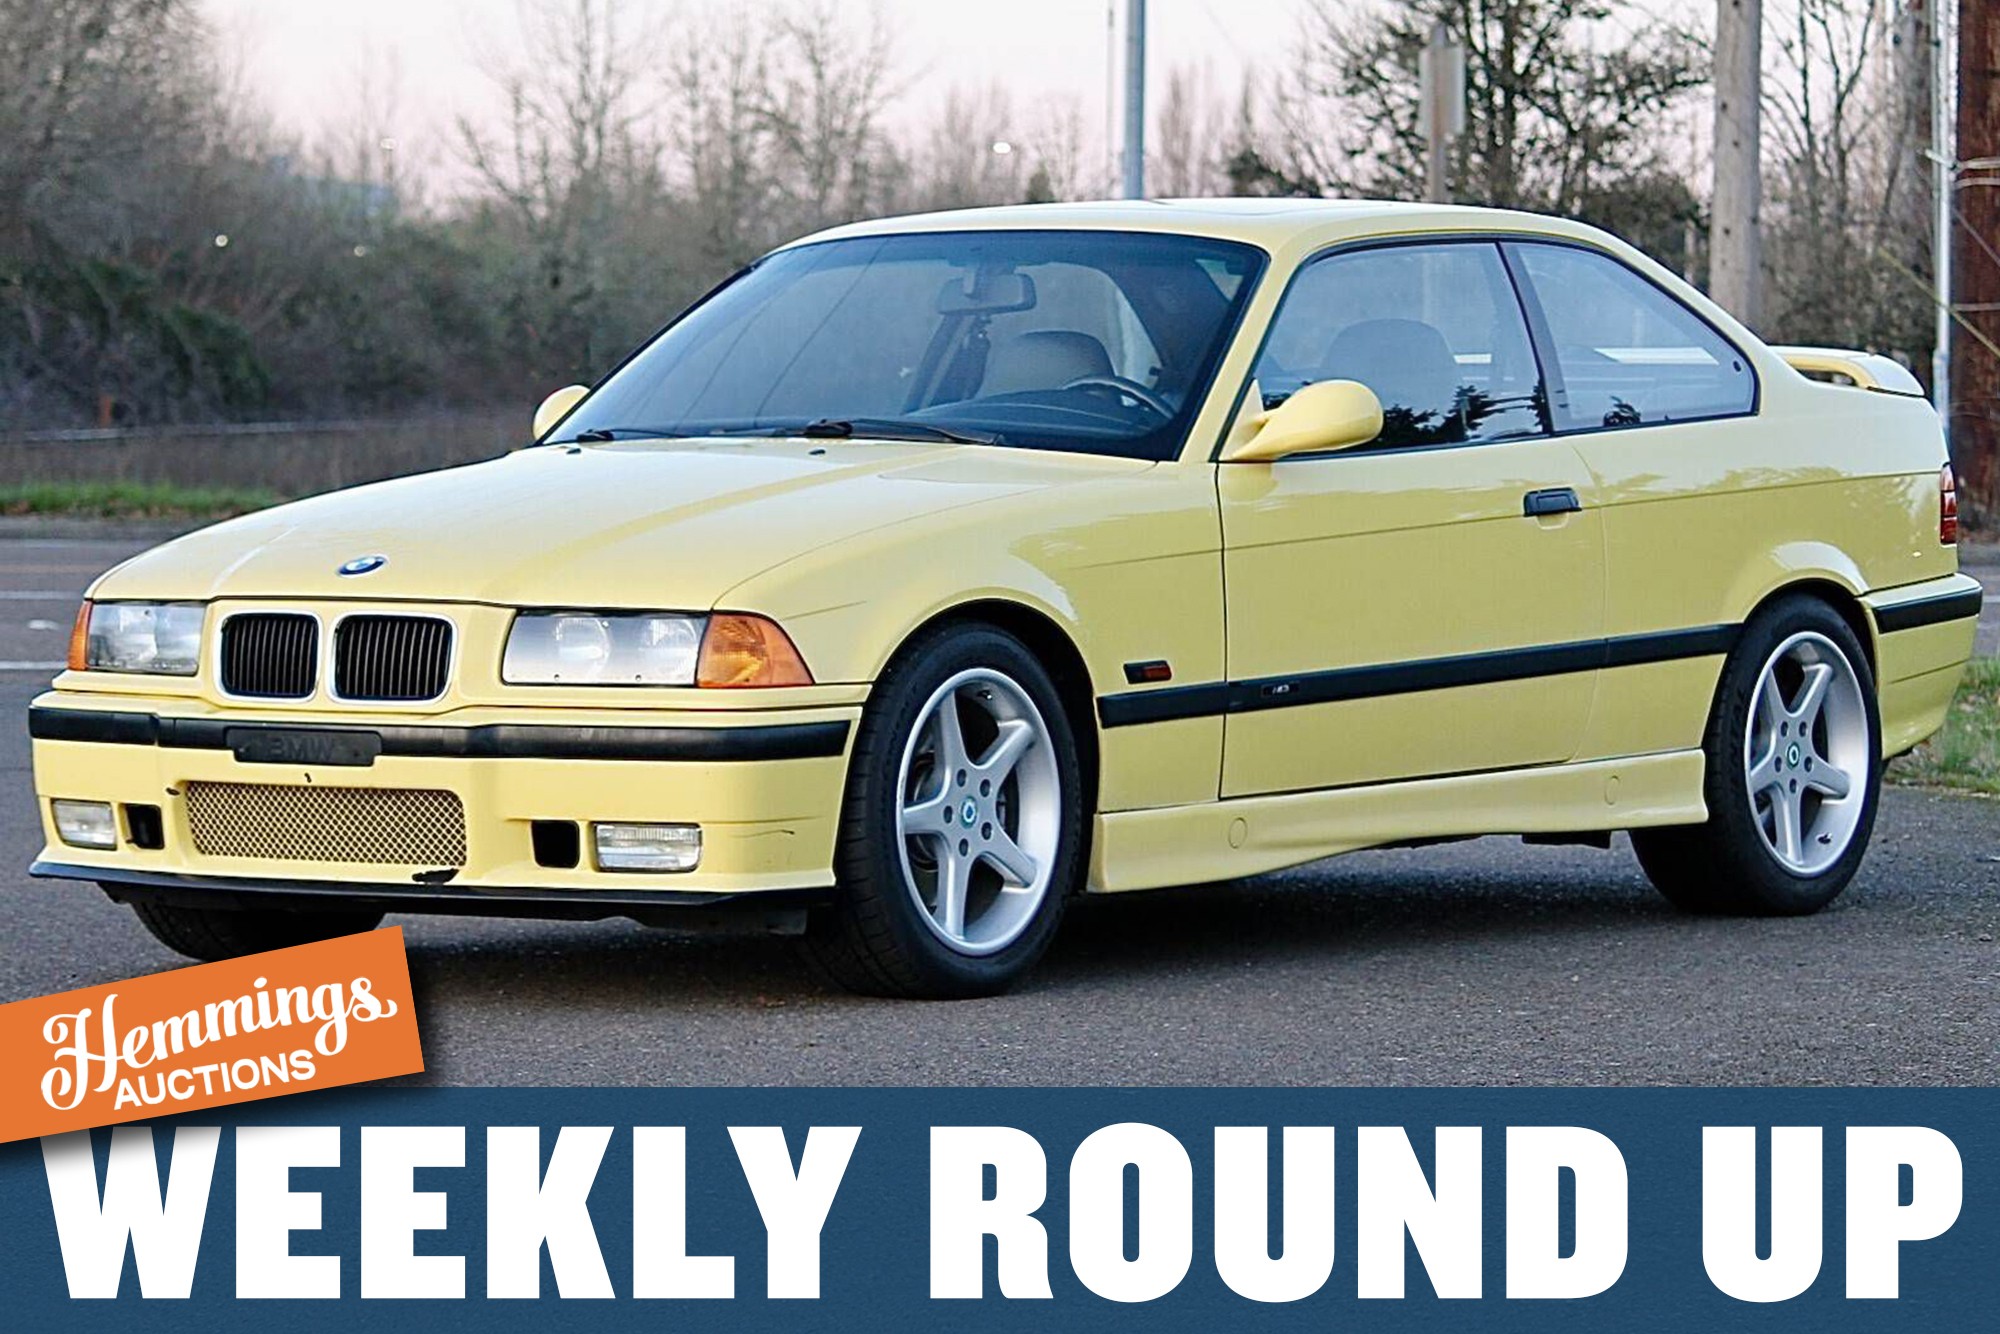 Hemmings Auctions Weekly Round Up: 1995 BMW M3, 1951 Ford Custom Convertible, 1968 Triumph Bonneville